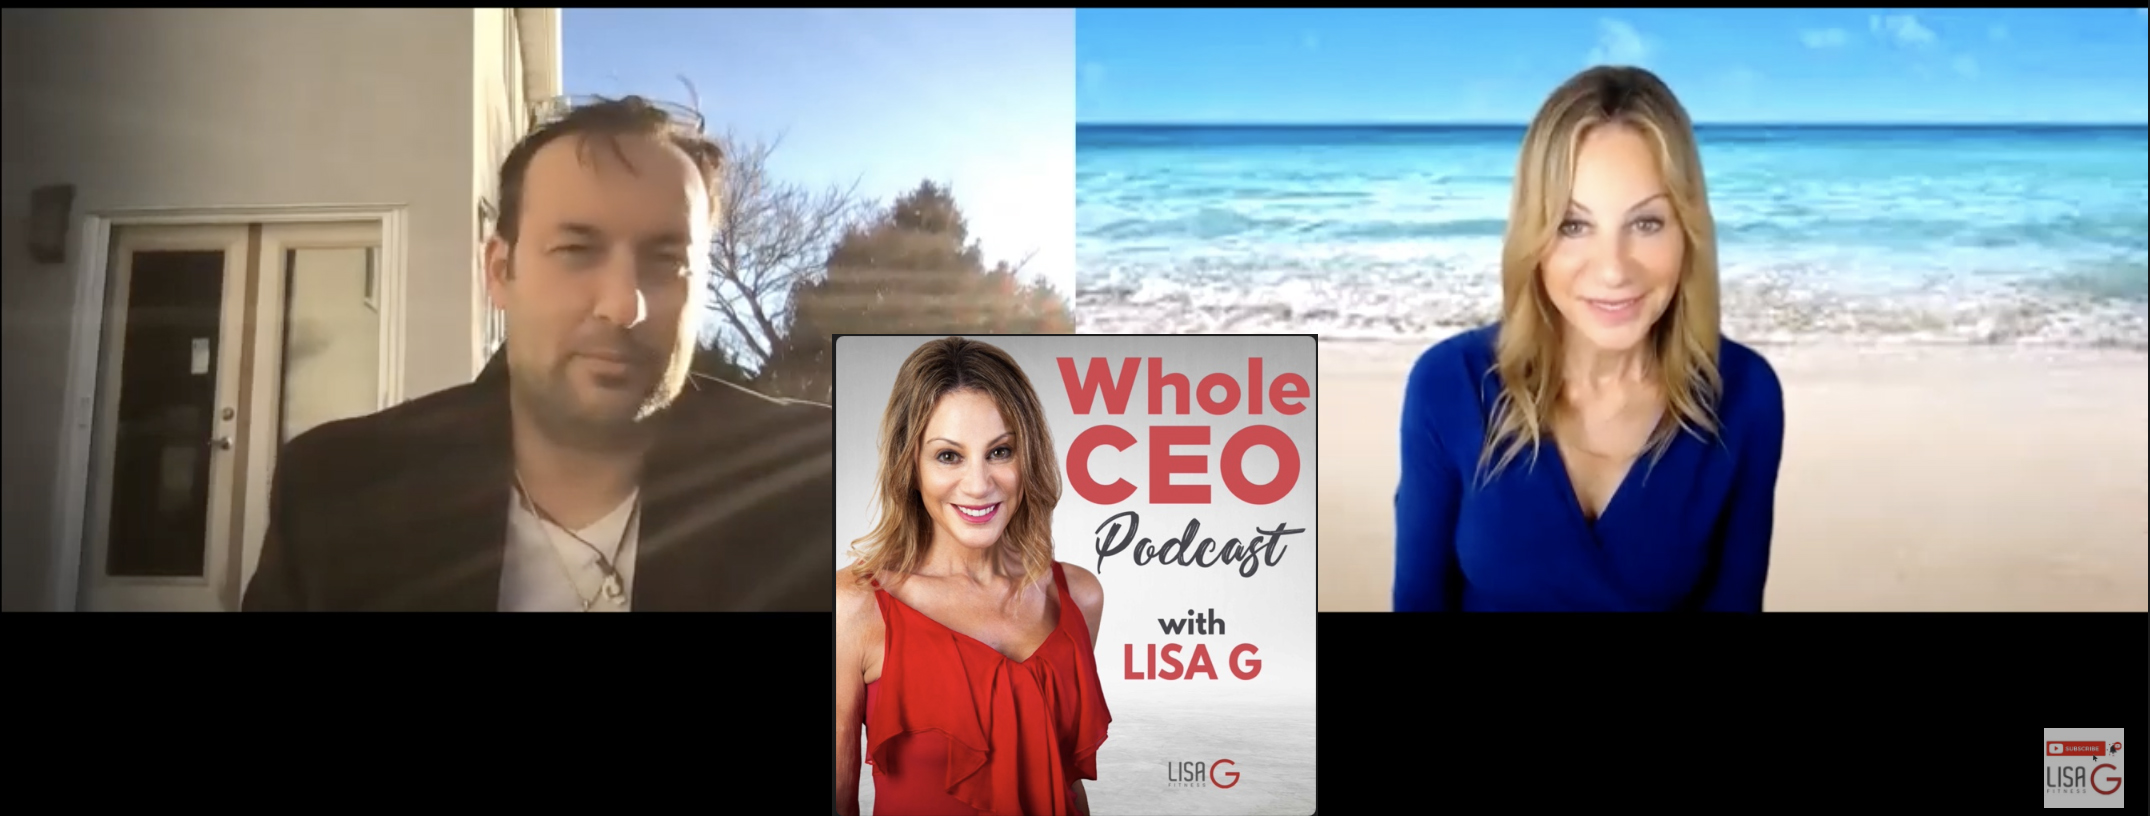 WholeCEO with Lisa G and Brian J. Esposito - How To Stay Calm in the Face of a Storm